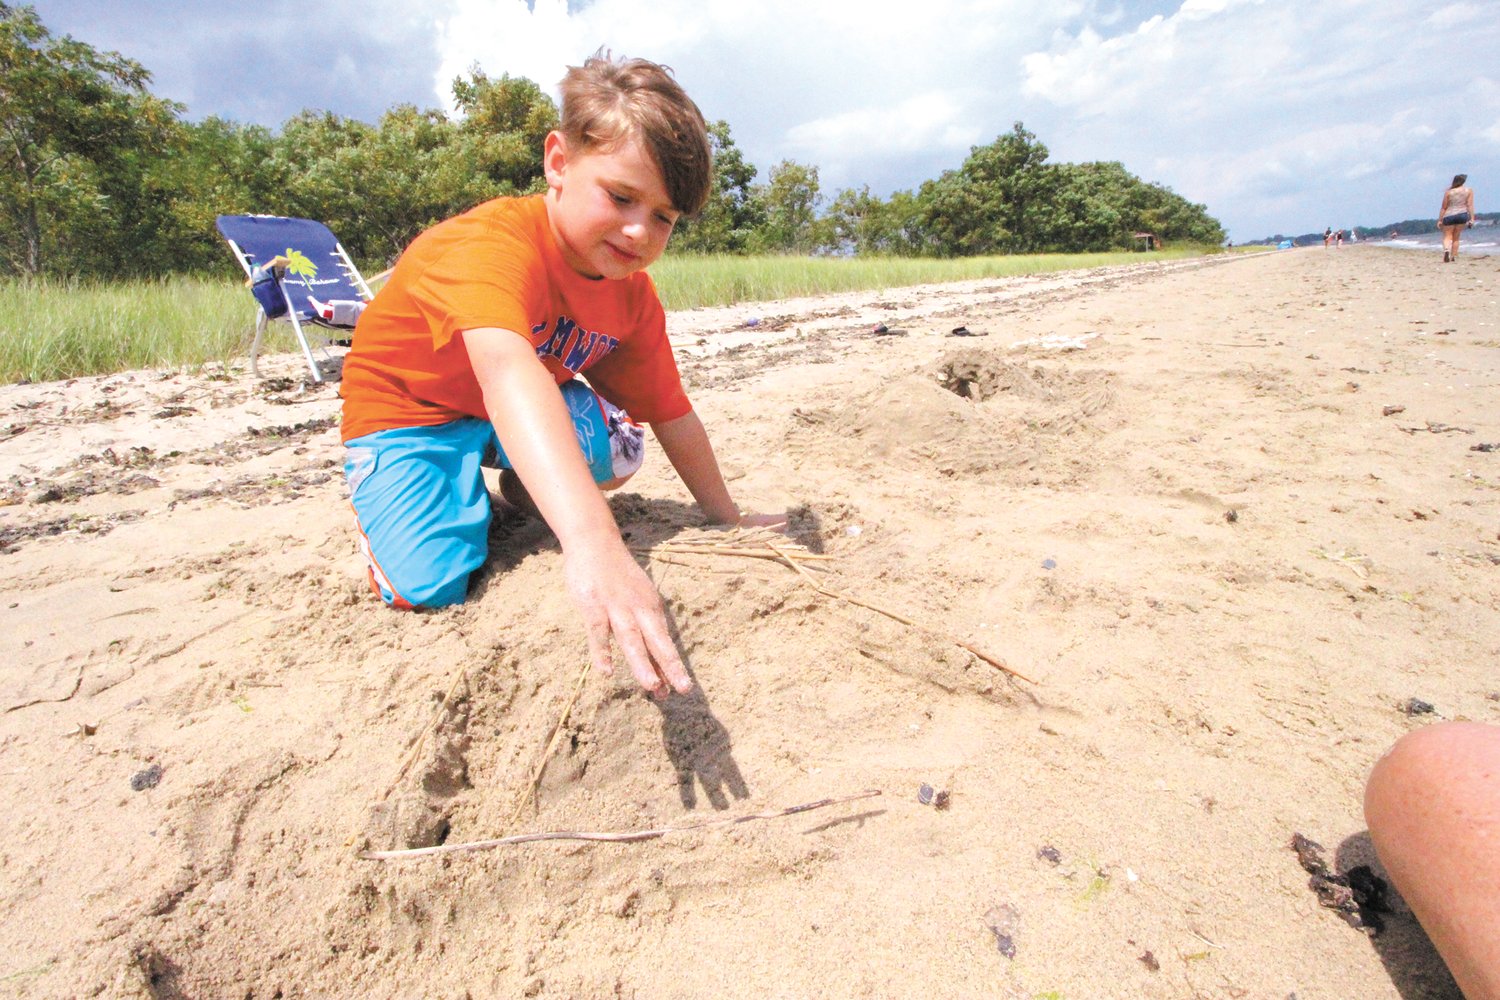 HIS OWN GASPEE: As divers looked to traces of the Gaspee off Gaspee Point, Bryce Sorrentino sculpted a ship out of sand with sticks as broken spars.